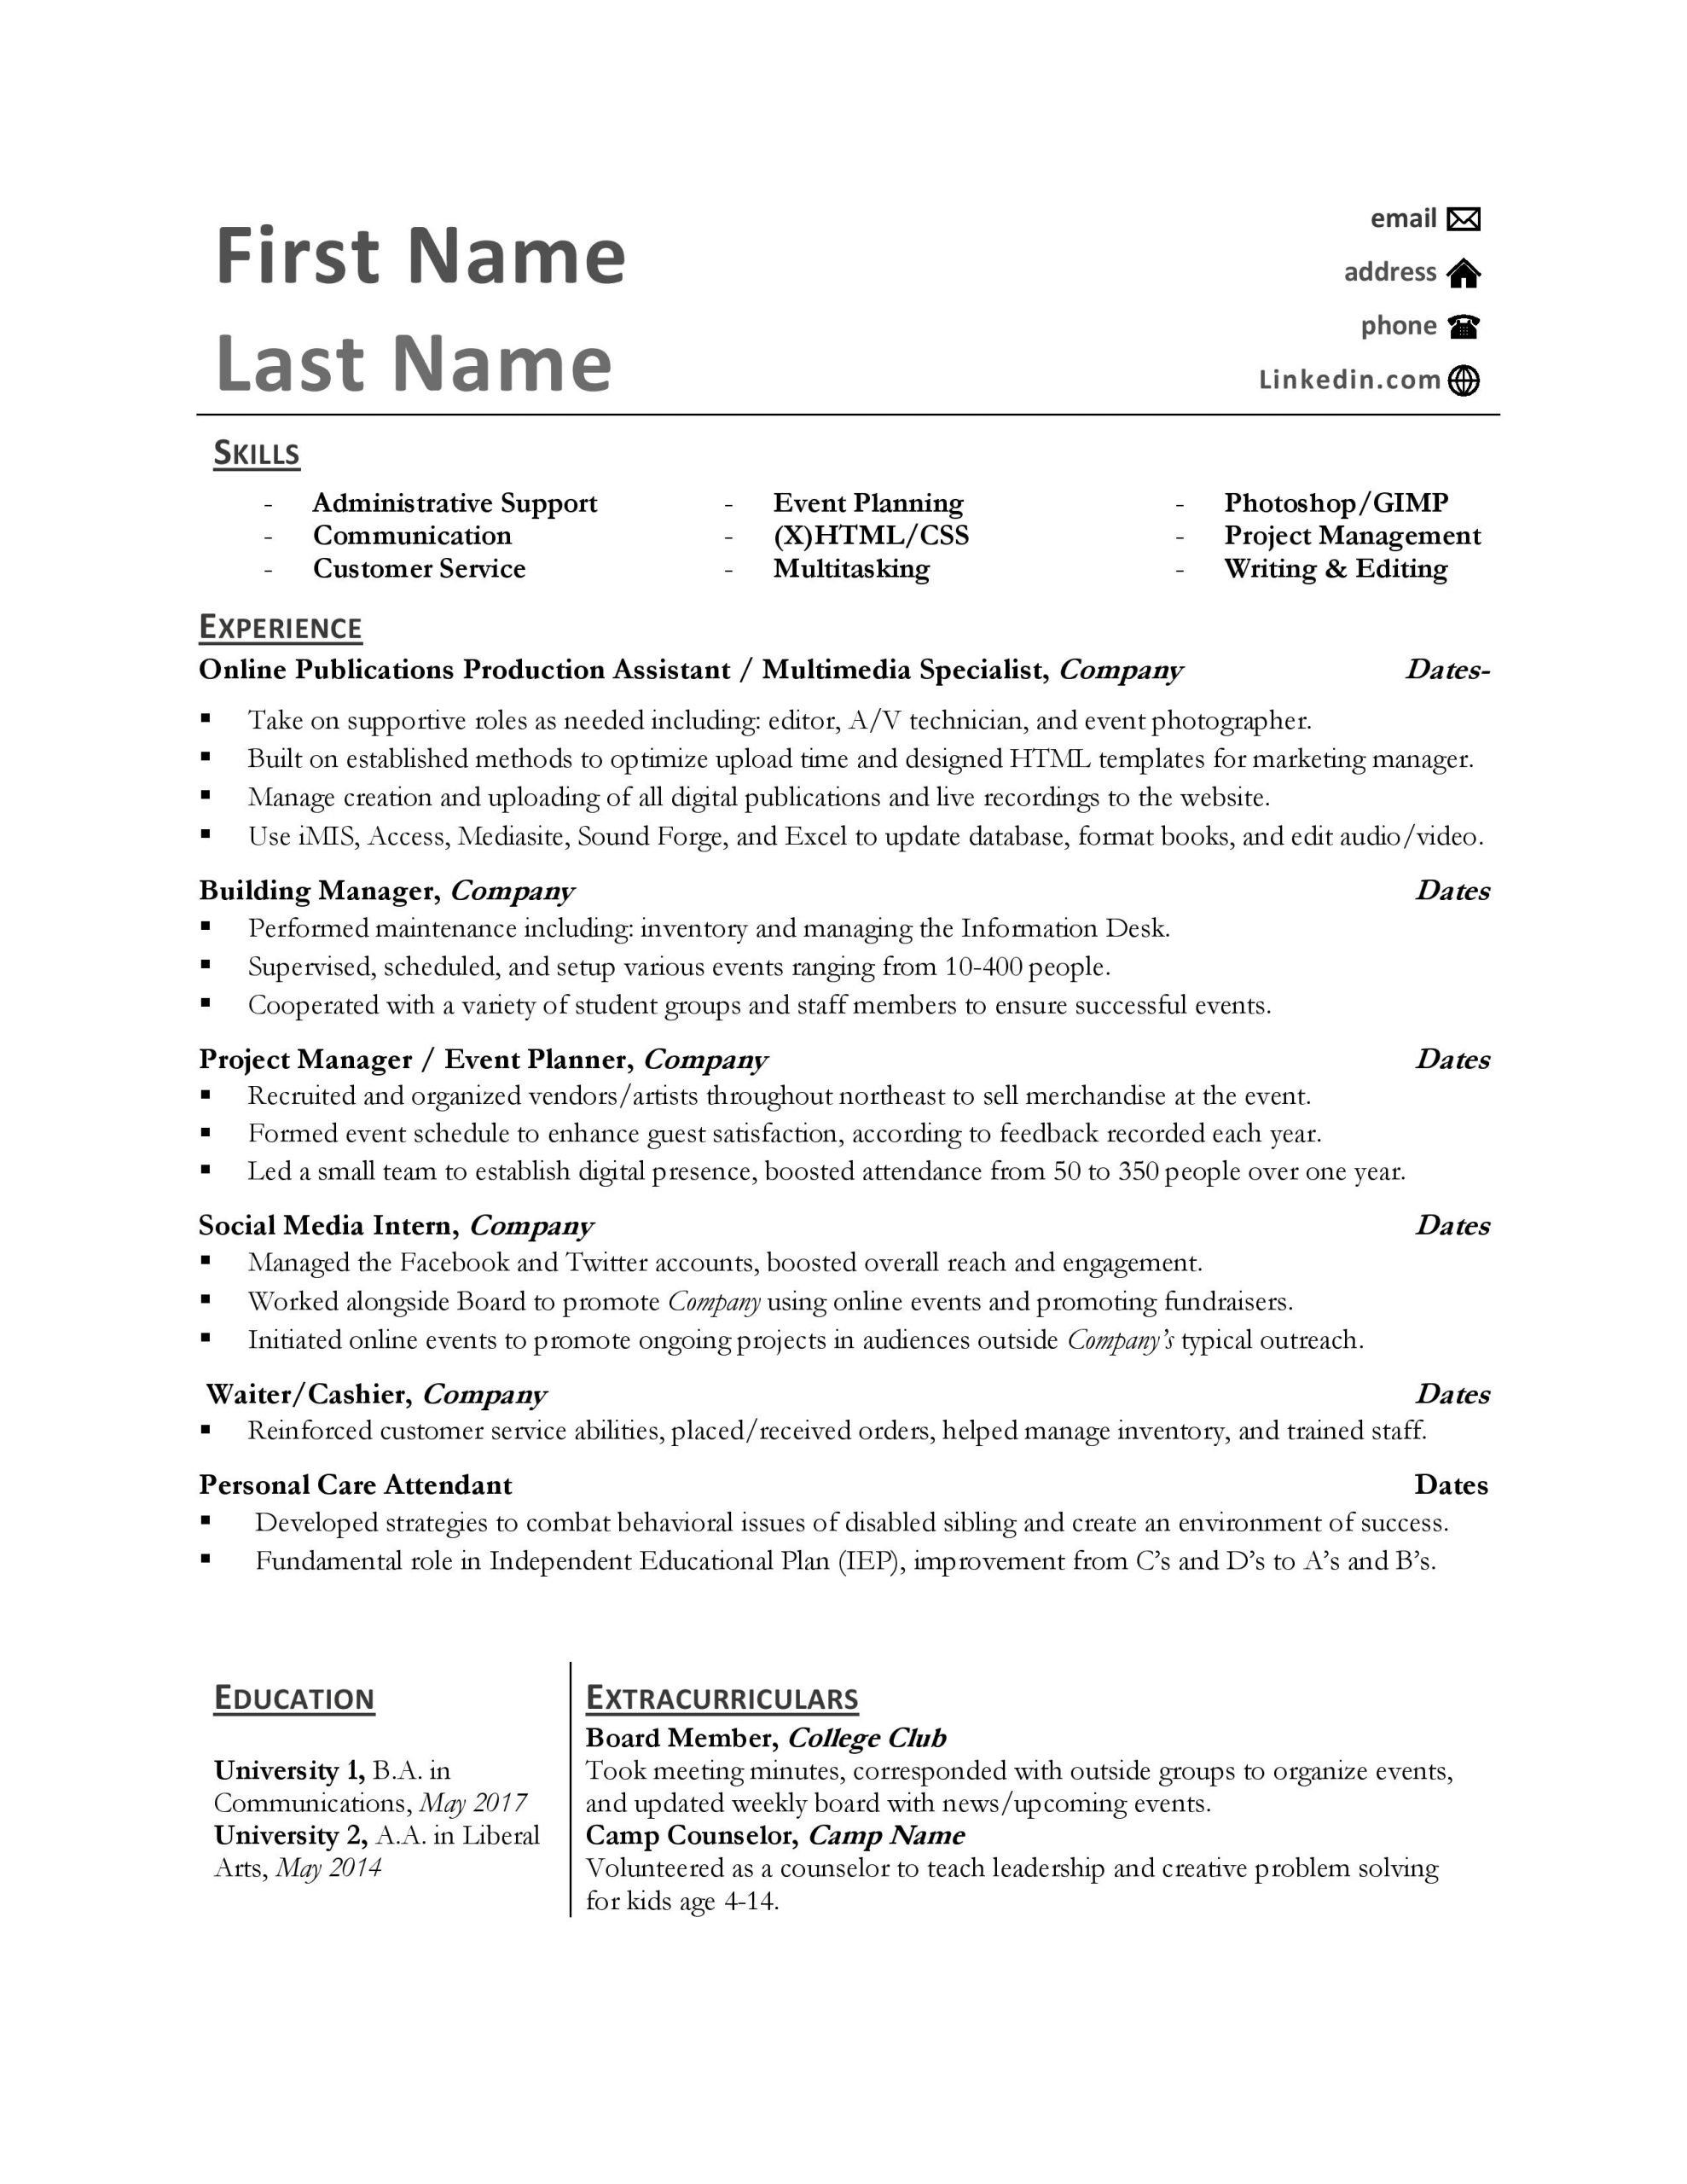 Resume Format Multiple Positions In Same Company